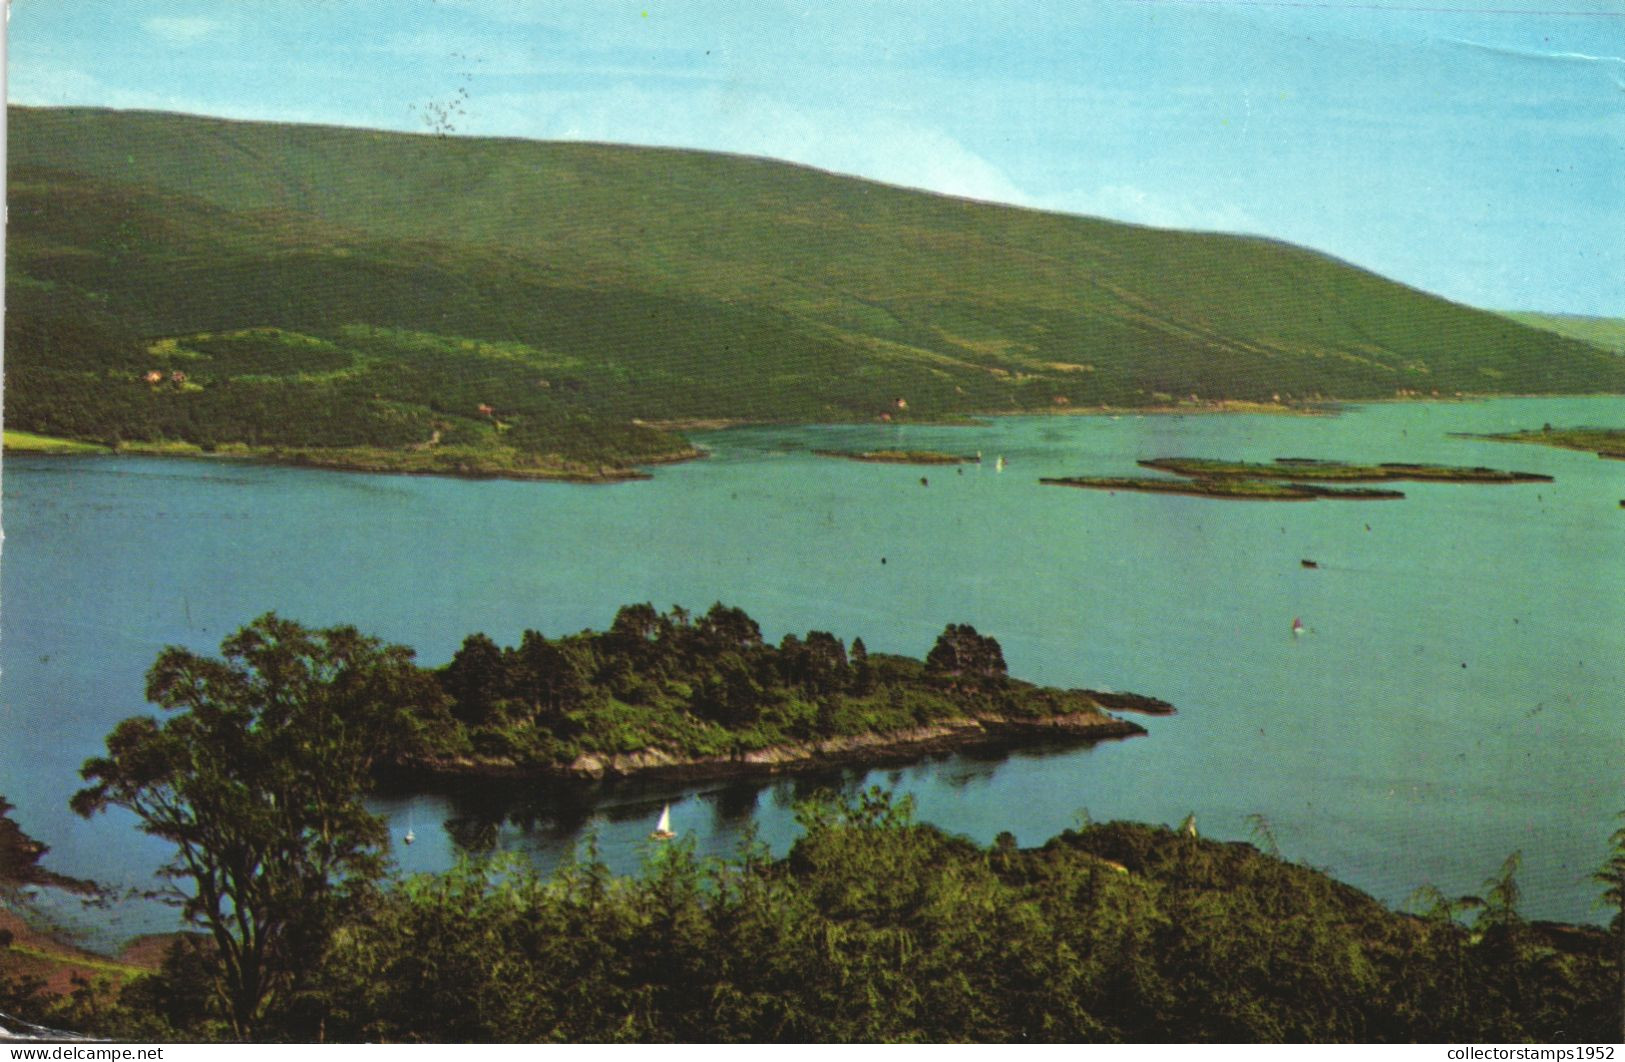 BUTE, CALADH ISLAND AND THE KYLES OF BUTE FROM THE NEW TIGHNABRUAICH ROAD, SCOTLAND - Bute